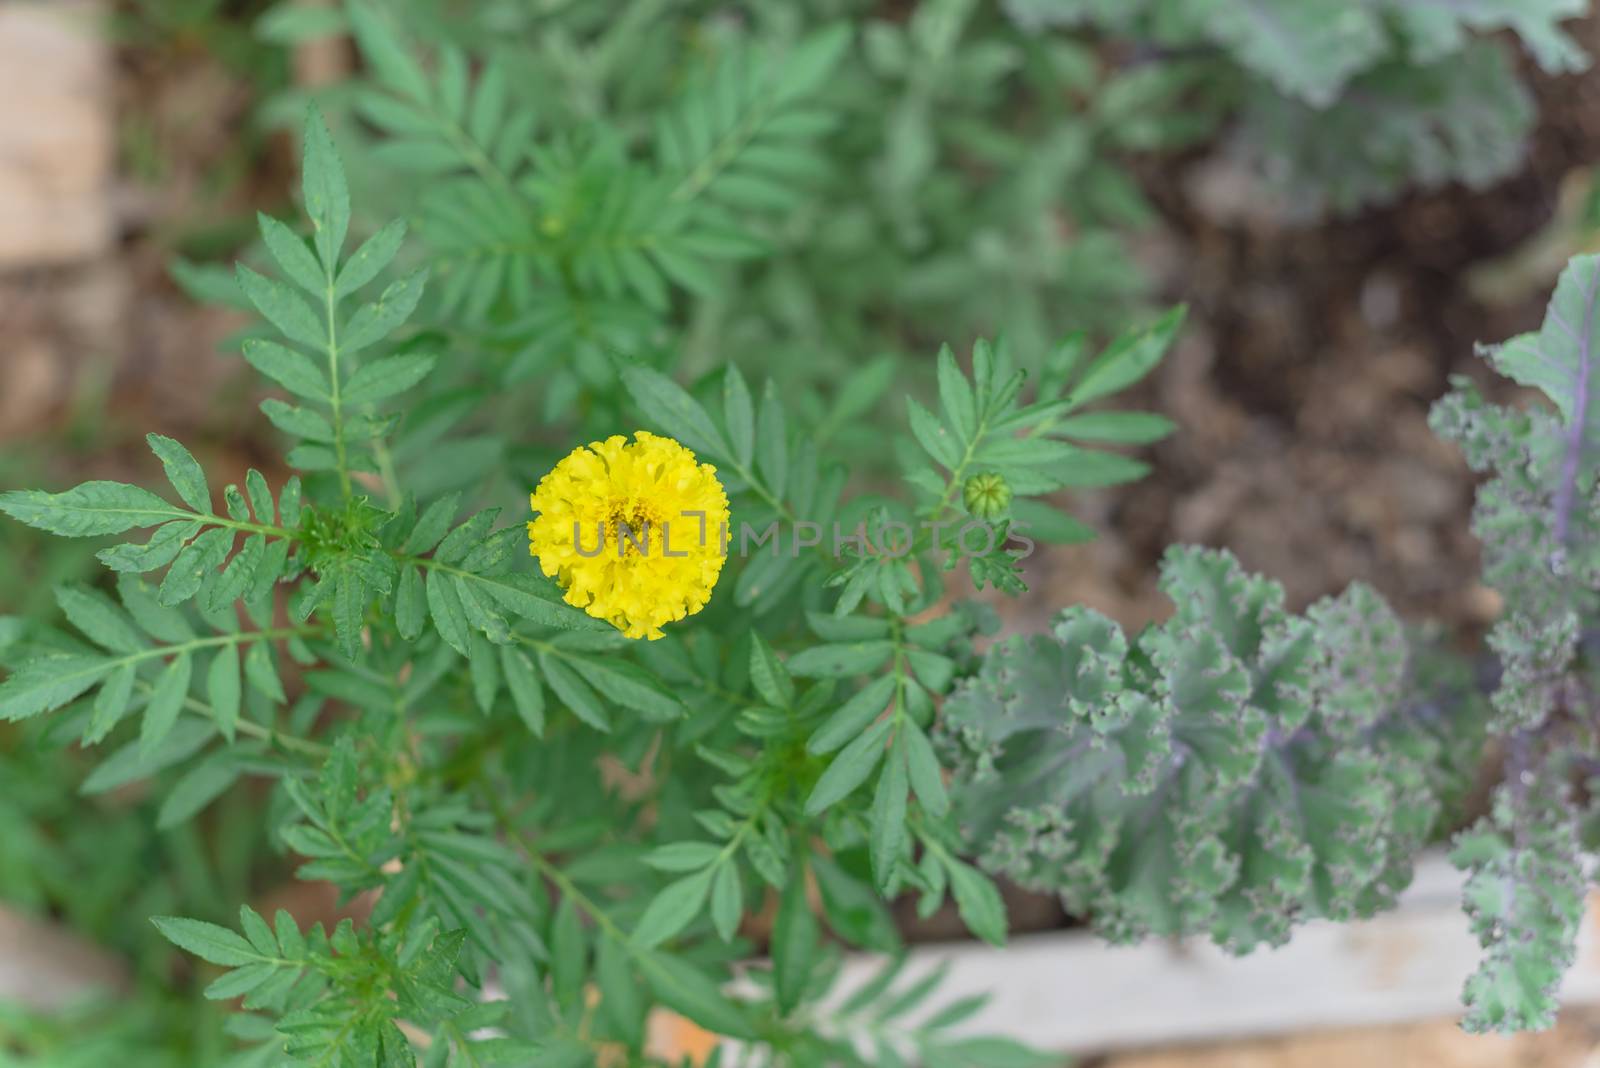 Blossom yellow marigold and red curly kale plants on raised bed garden near Dallas, Texas, America. Organic homegrown medical flower blooming in springtime